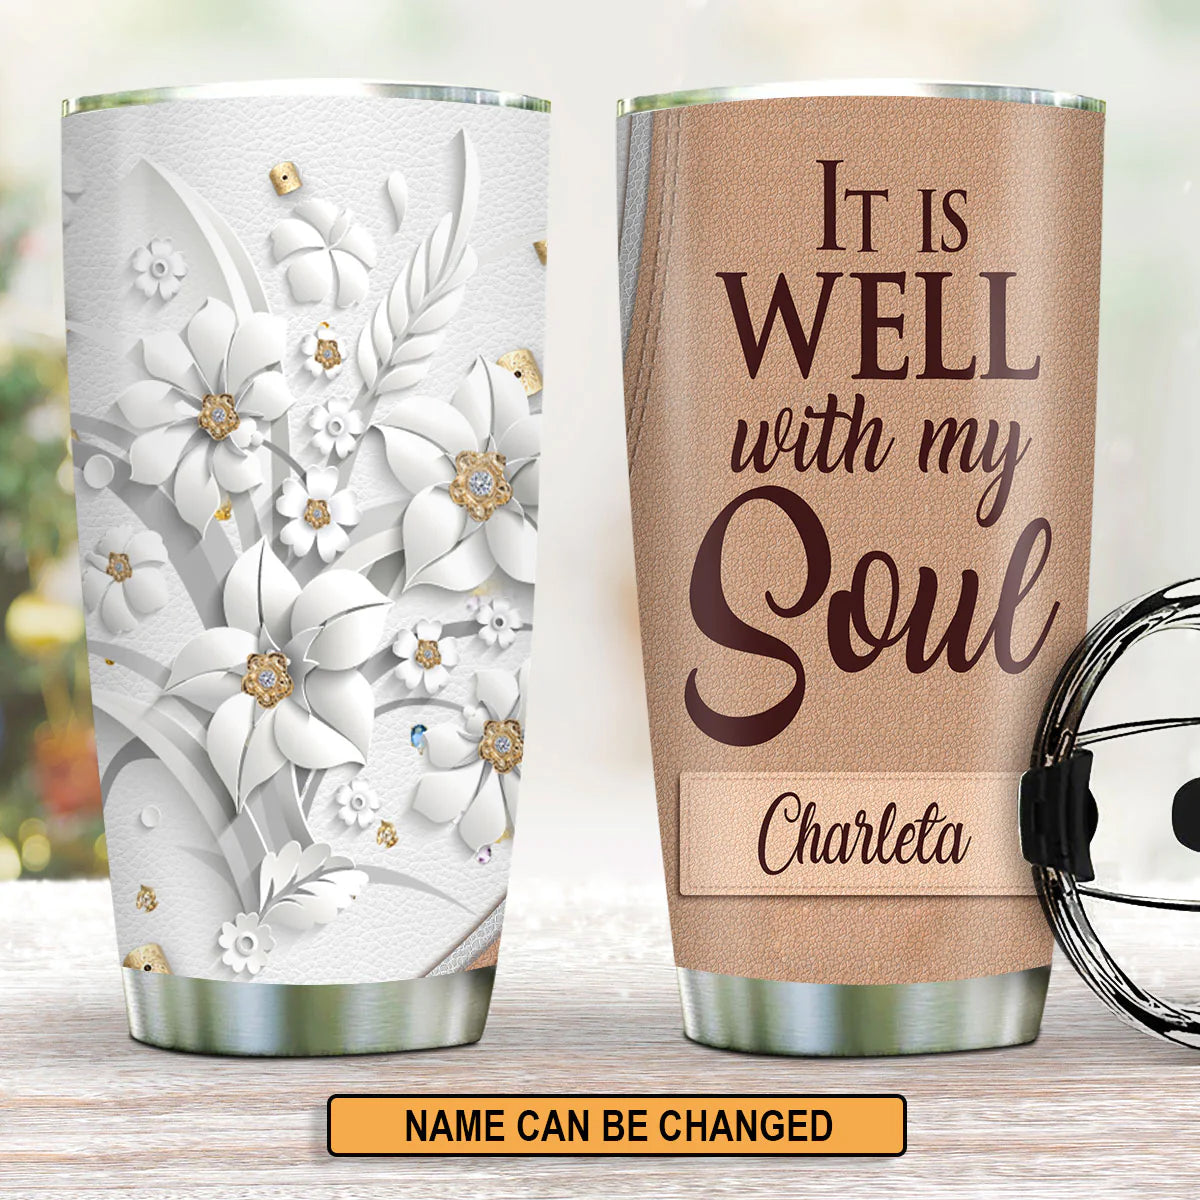 Christianartbag Drinkware, It Is Well With My Soul, Personalized Mug, Tumbler, Personalized Gift. - Christian Art Bag